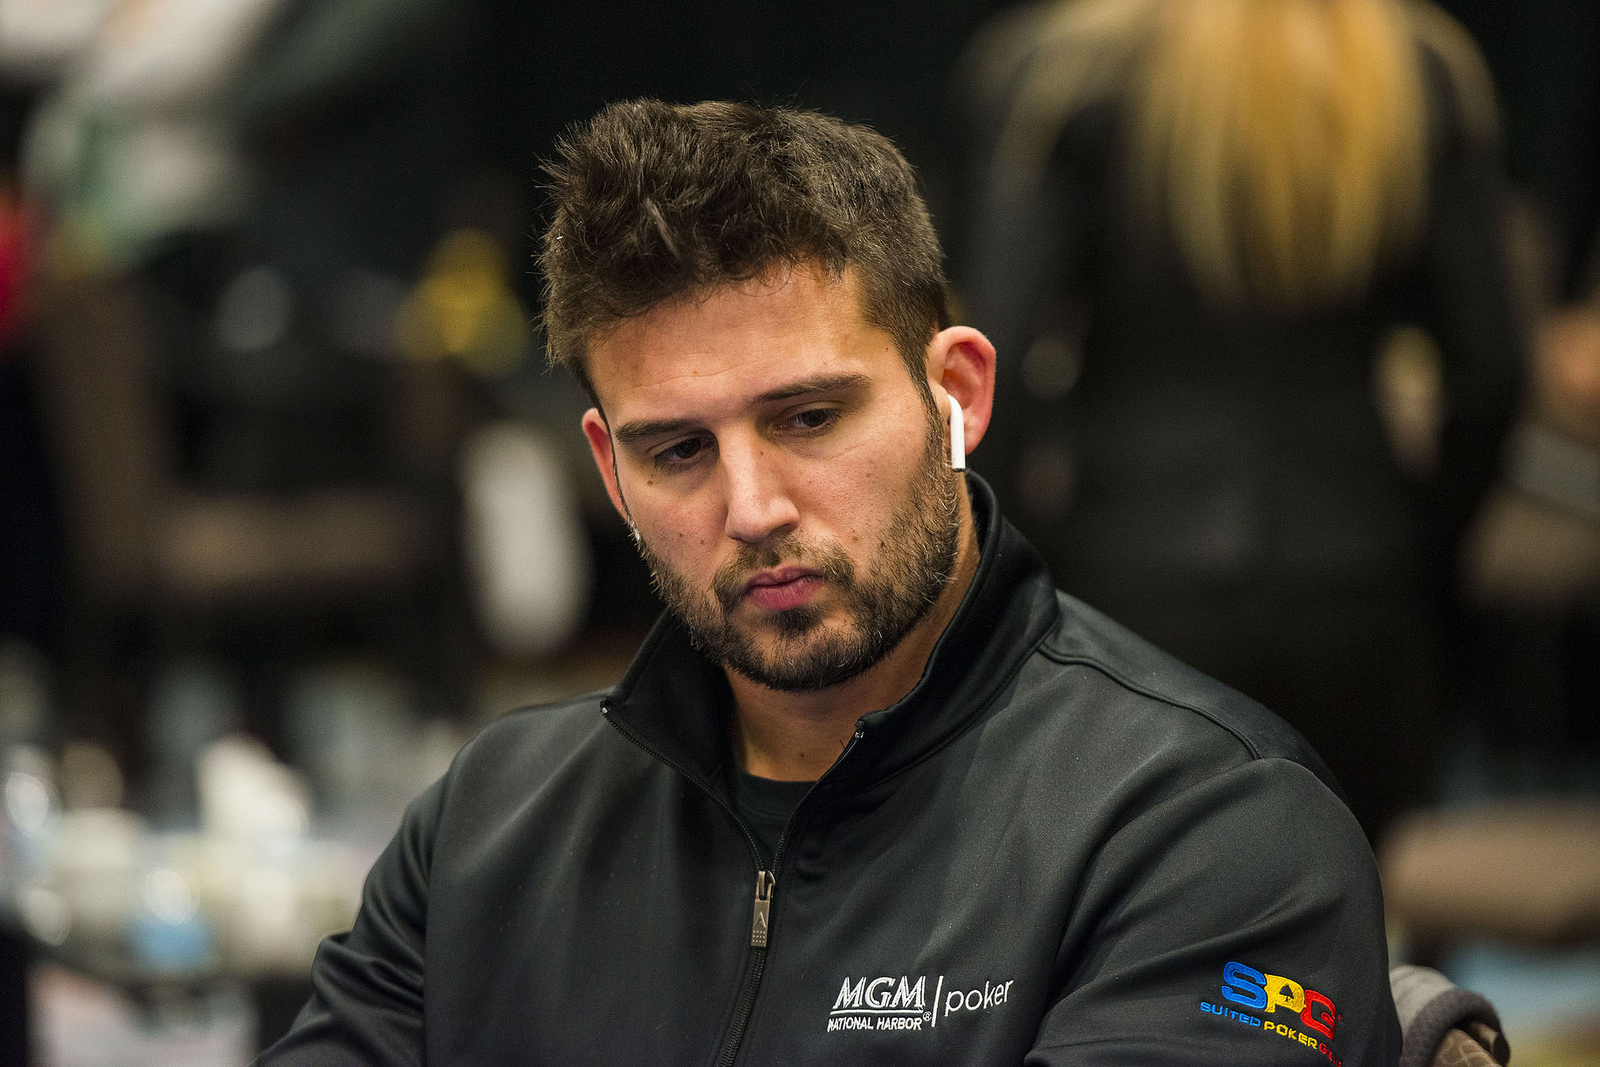 Poker Tour GOATs: Who Beasts the WPT, WSOP, MSPT, HPT, EPT, and Other Circuit Brands